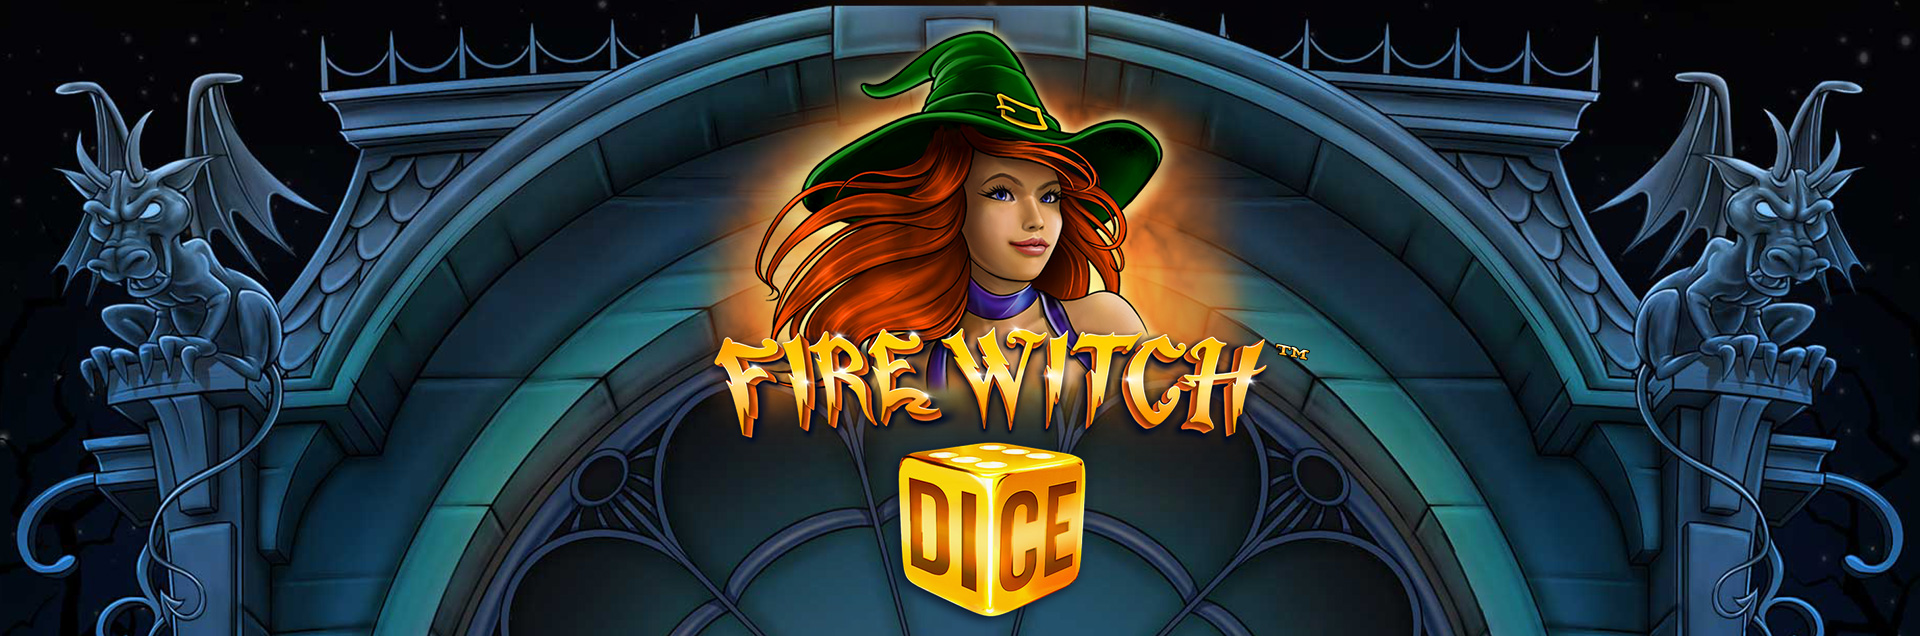 Fire Witch Dice header games